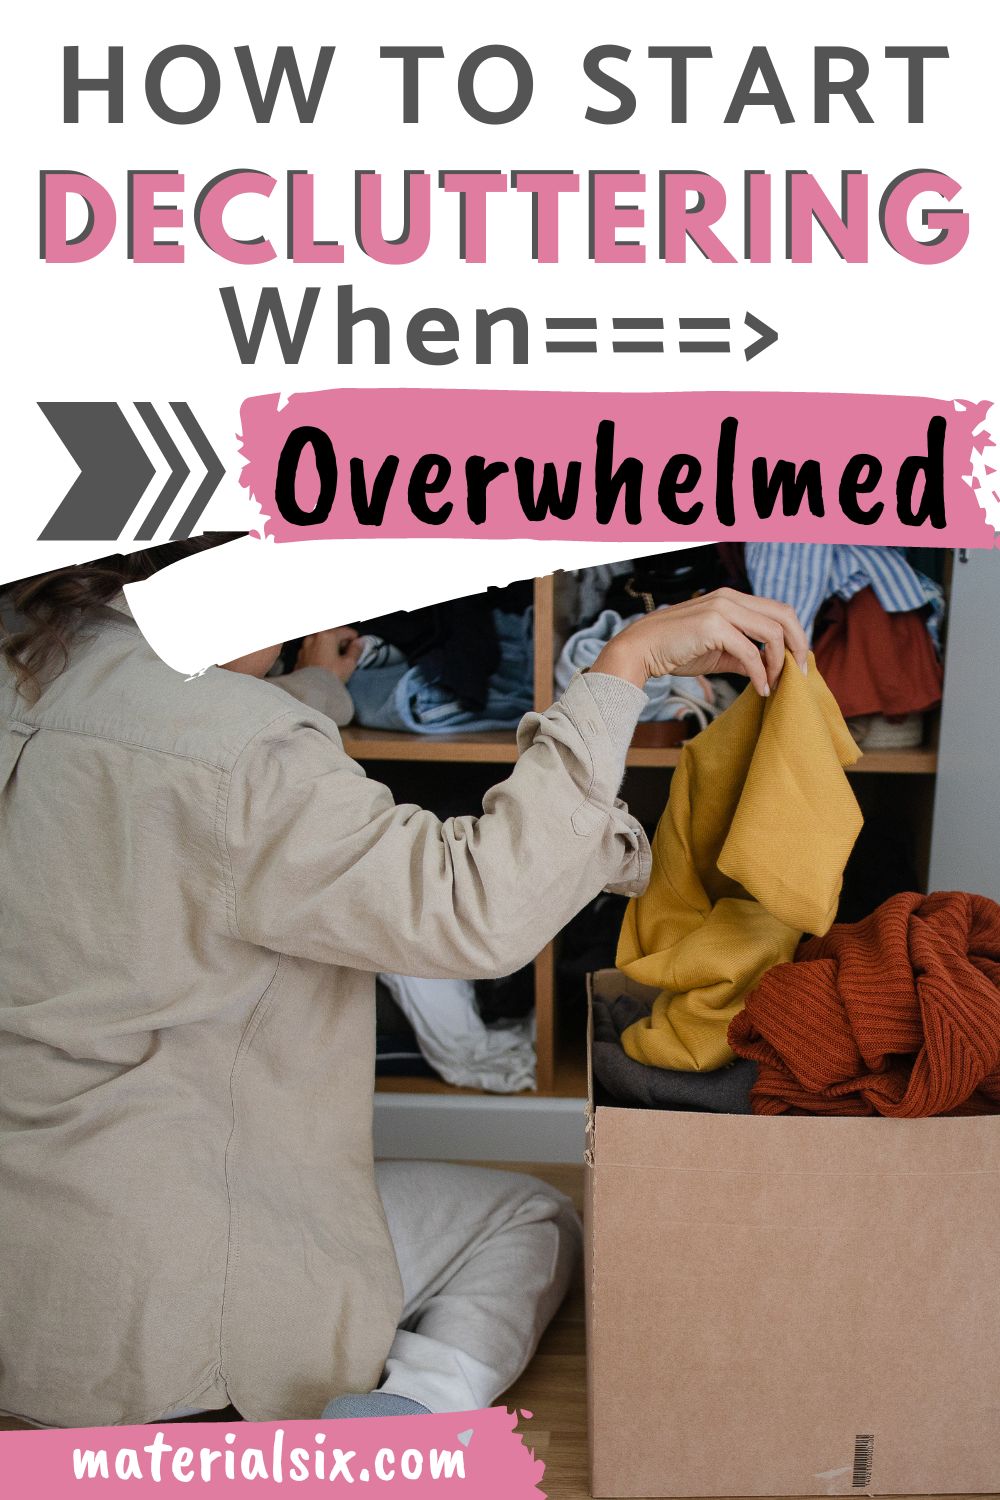 How to Start Decluttering When Overwhelmed (Practical Advices)